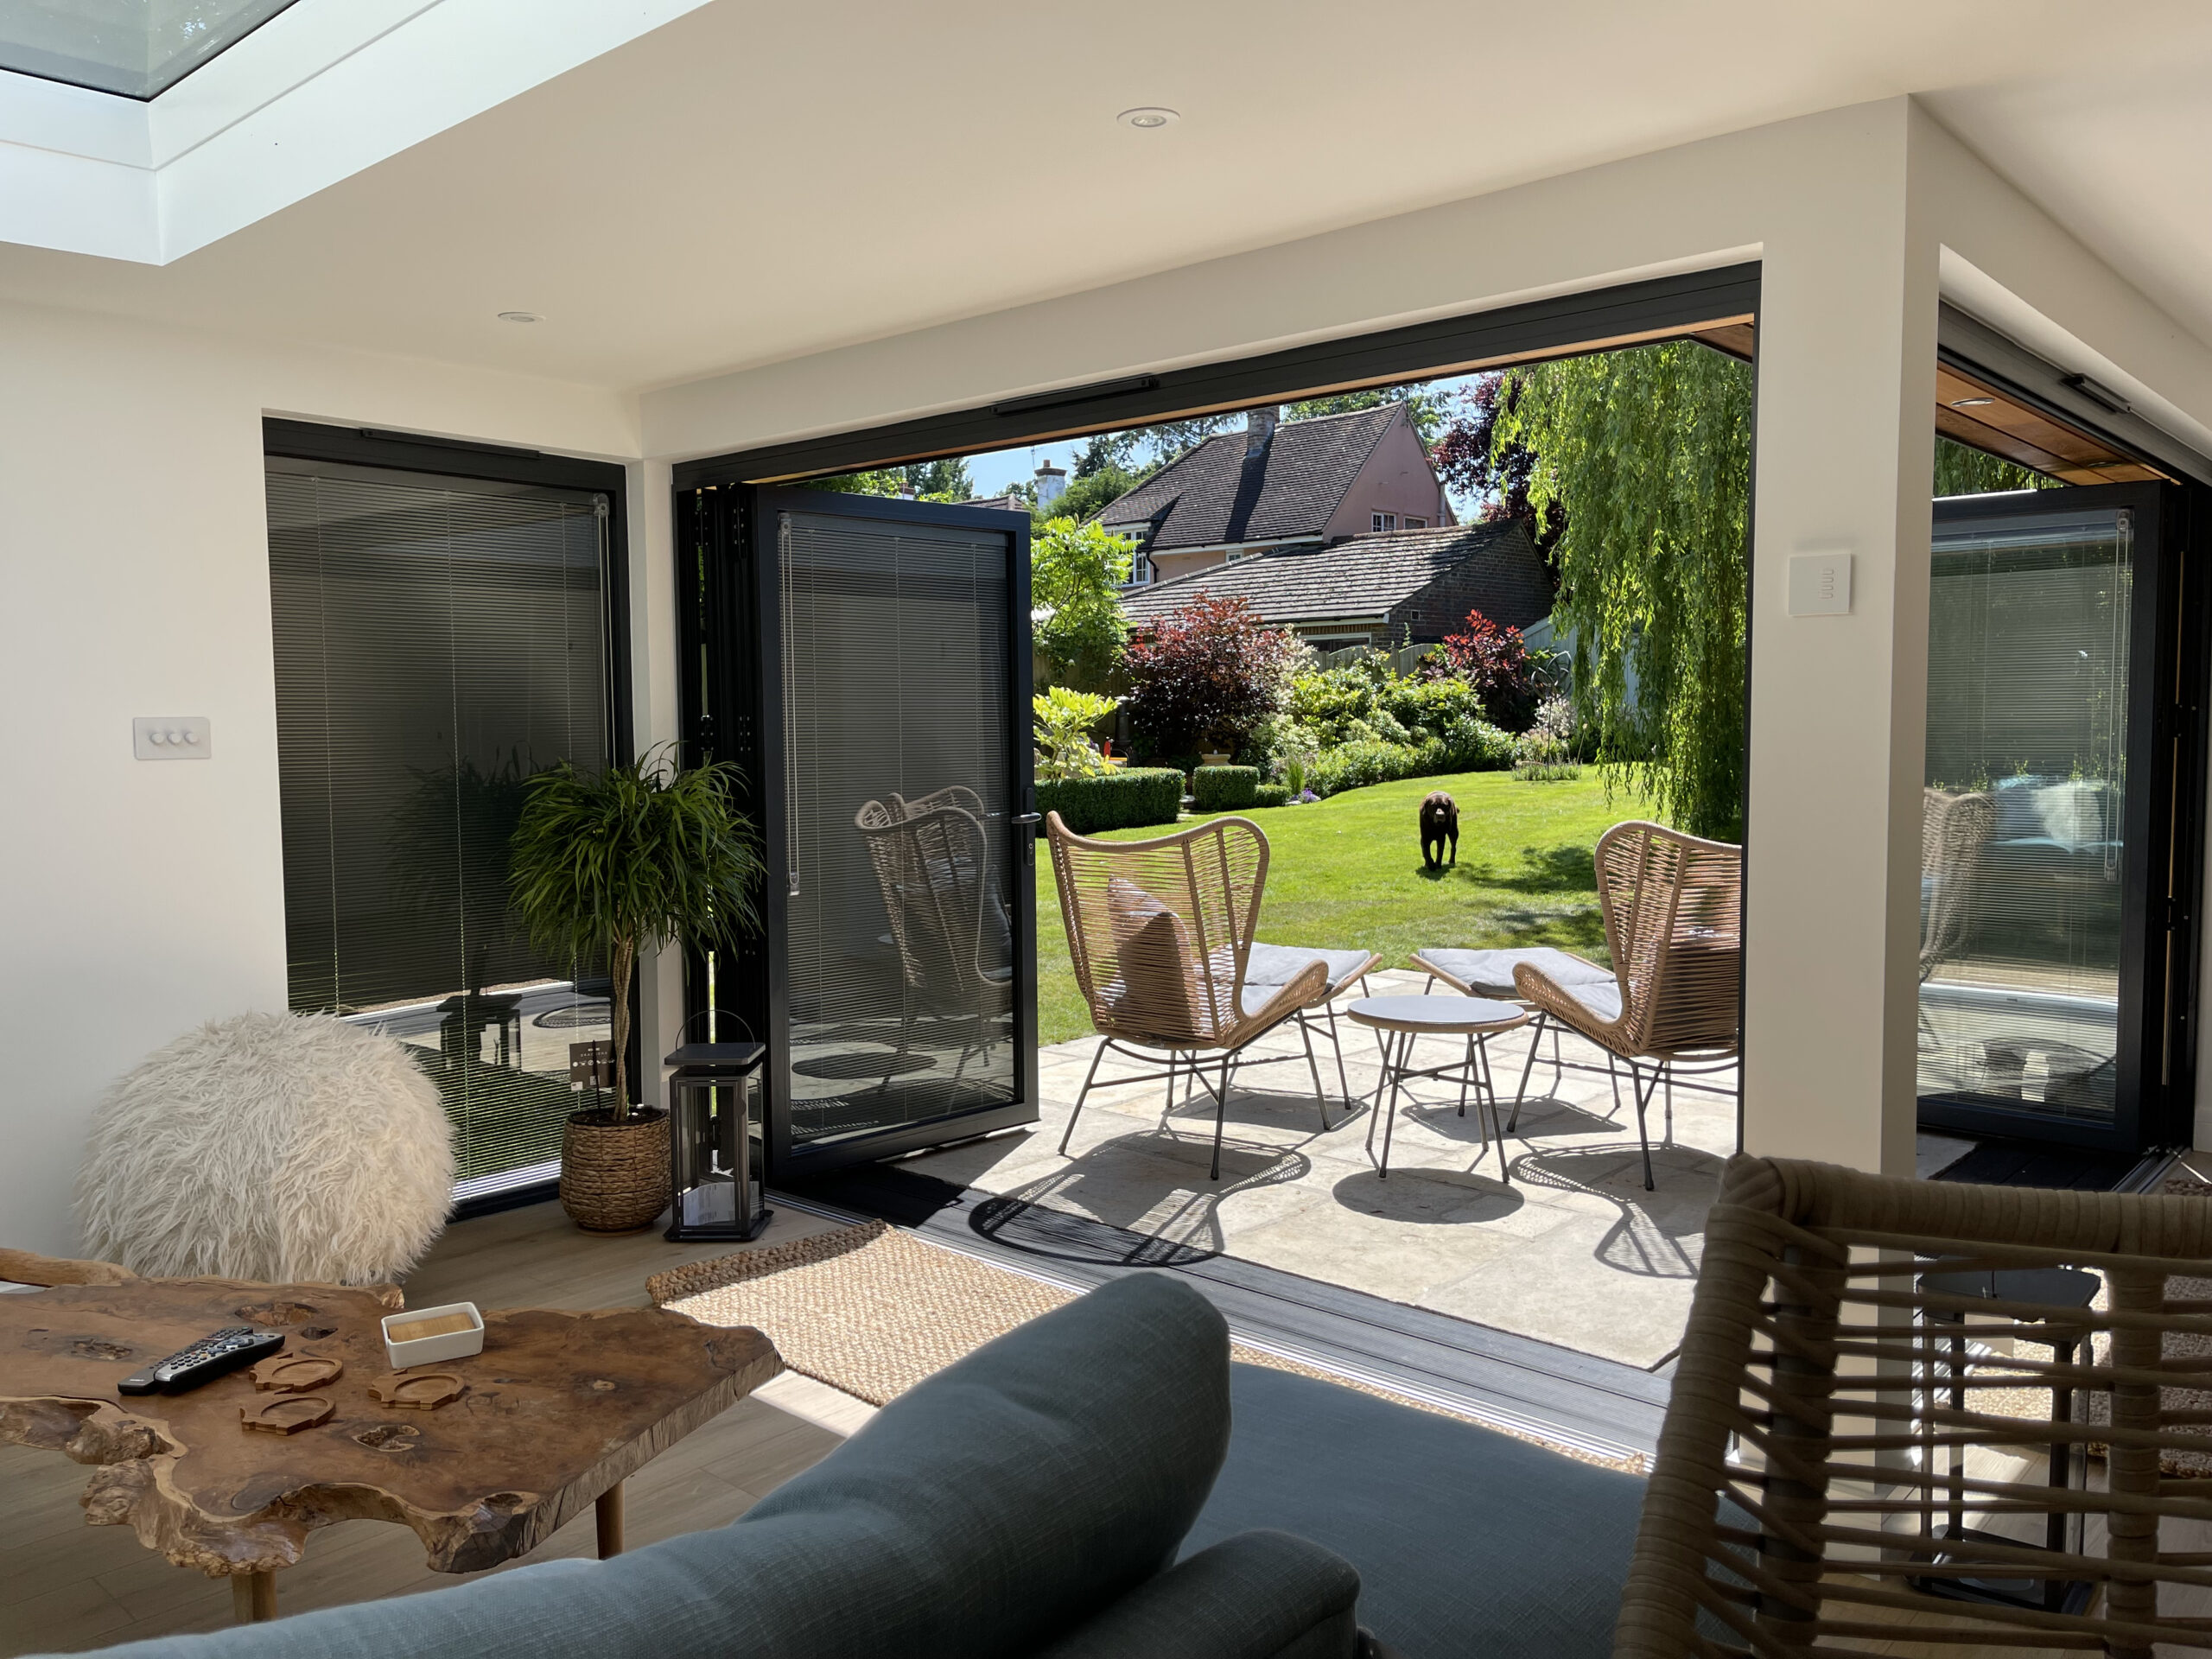 Interior of a Vivid Green furnished L-shaped garden room with anthracite grey aluminium bi-fold doors with integral blinds opening onto a tiled patio with outdoor furniture and a sunny grass lawn, with the main house visible in the background.